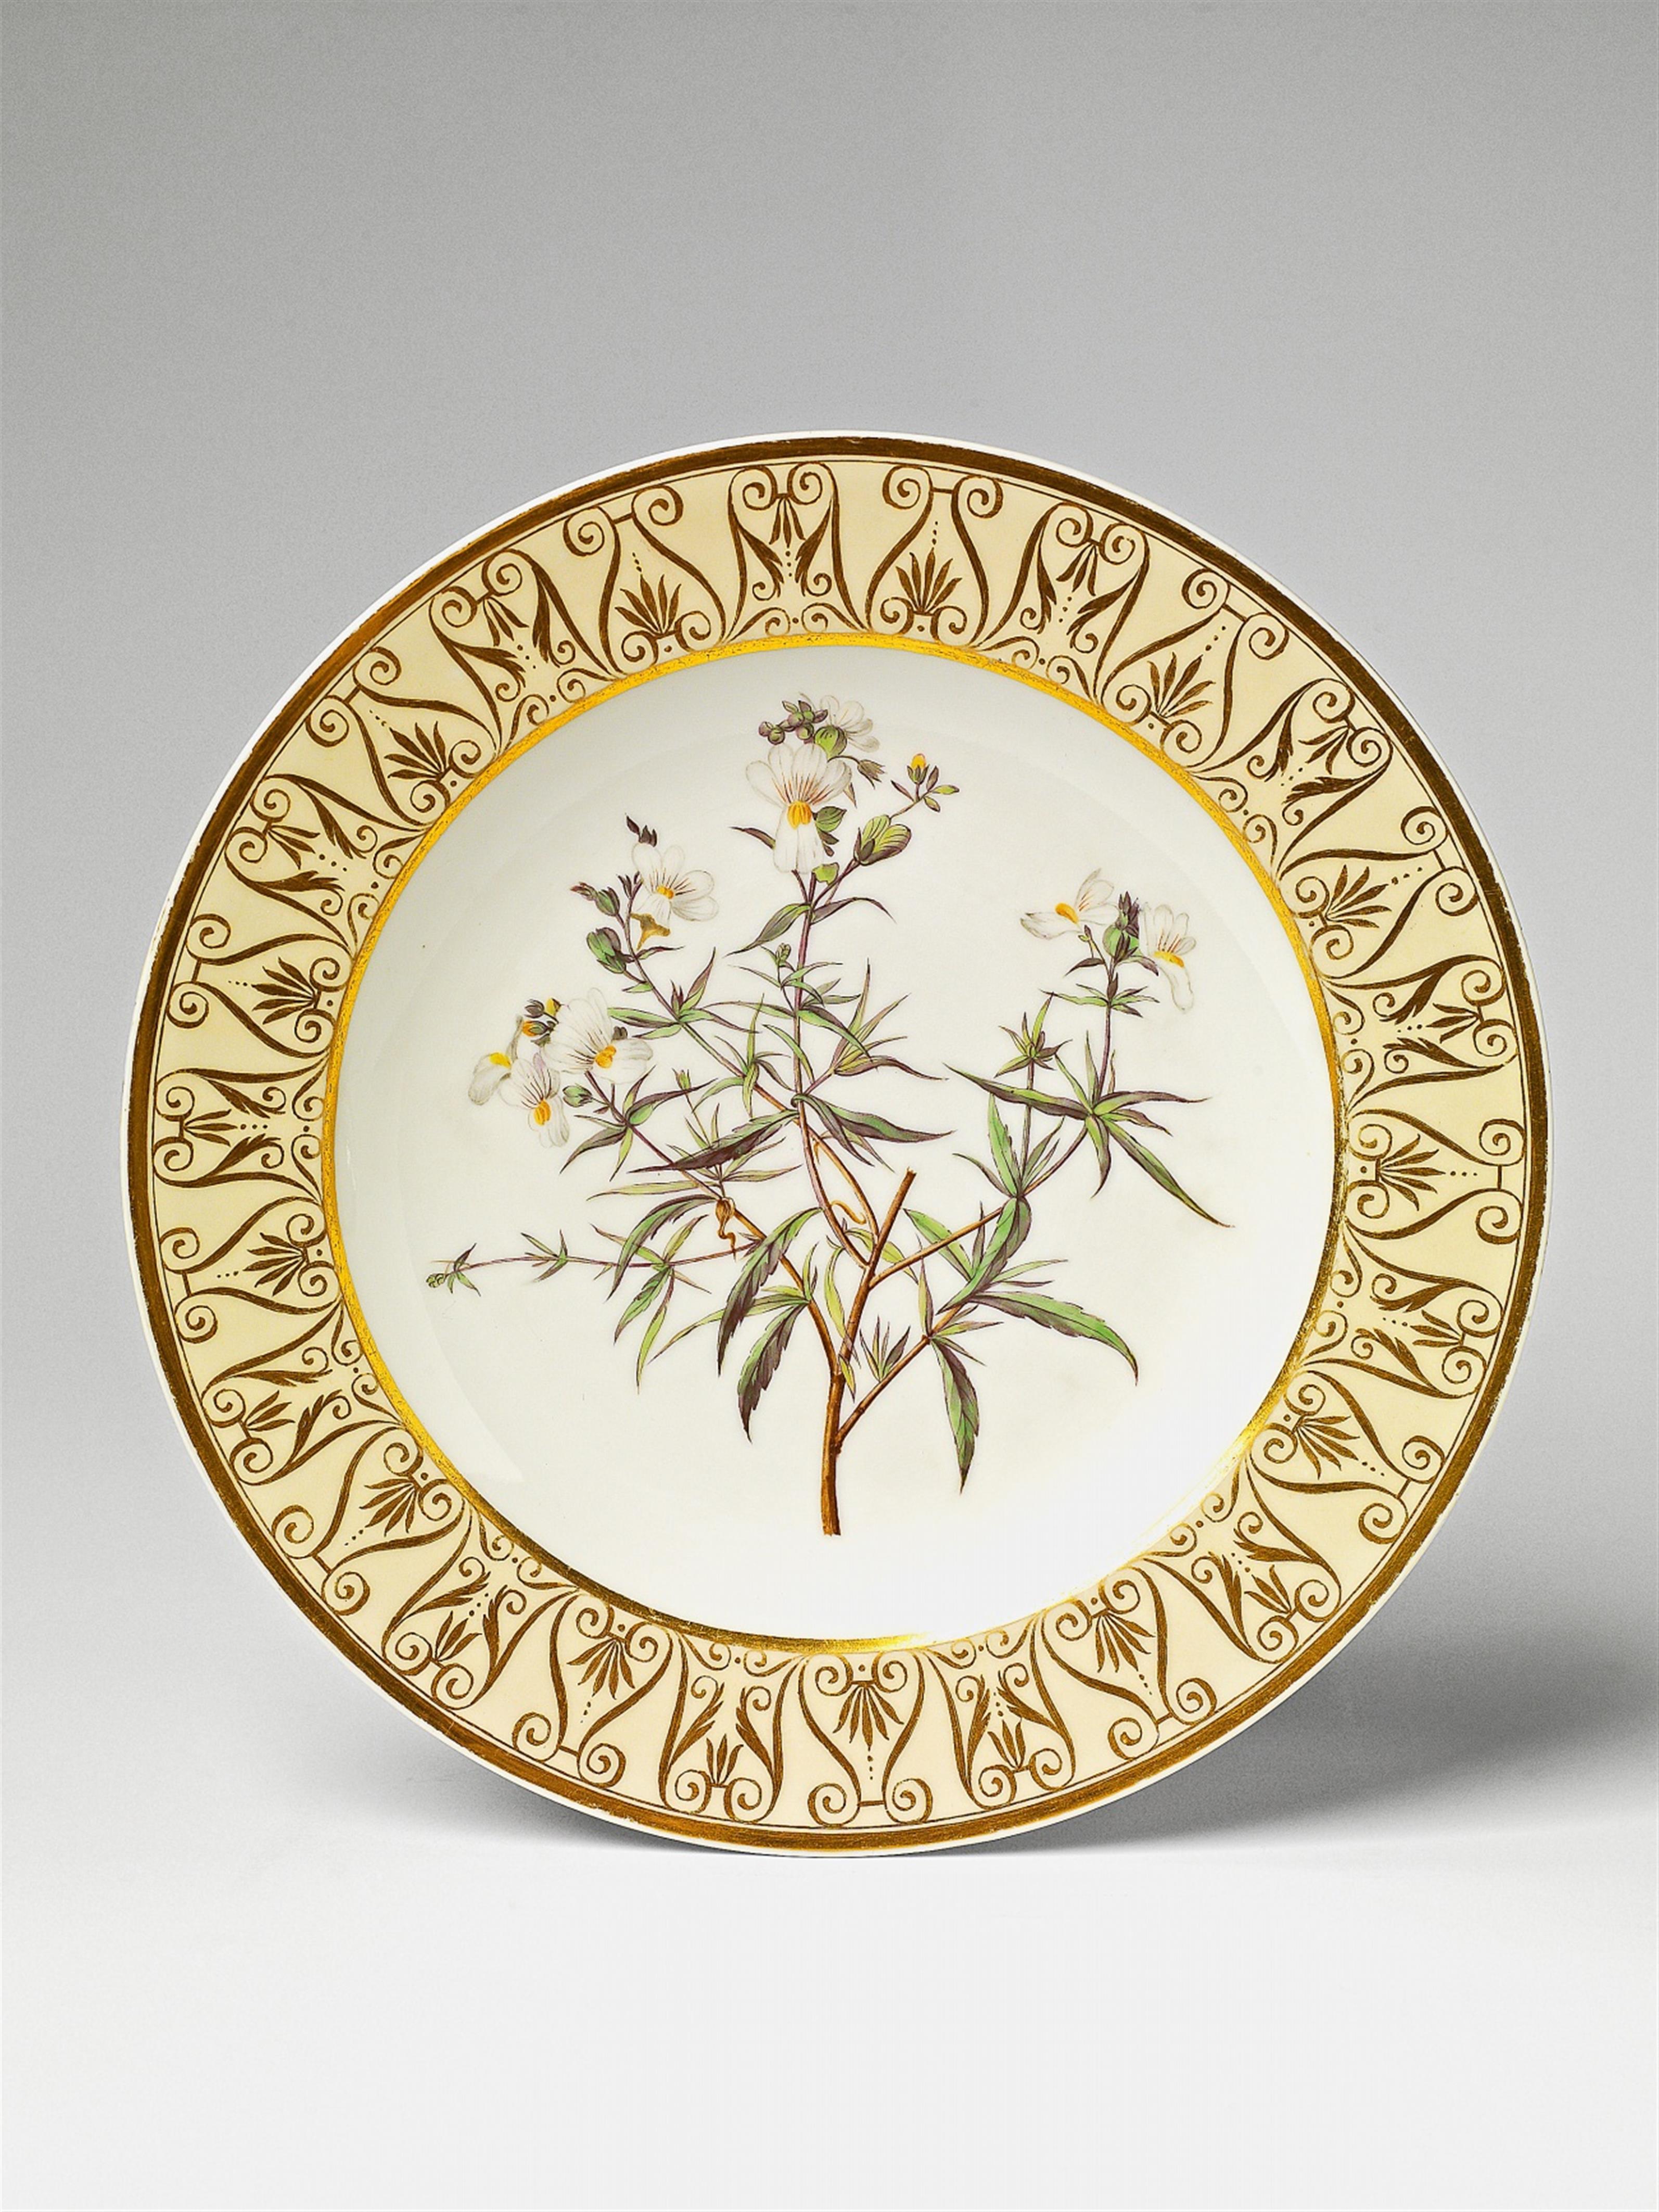 A Berlin KPM porcelain plate from the botanical service for Empress Joséphine - image-1